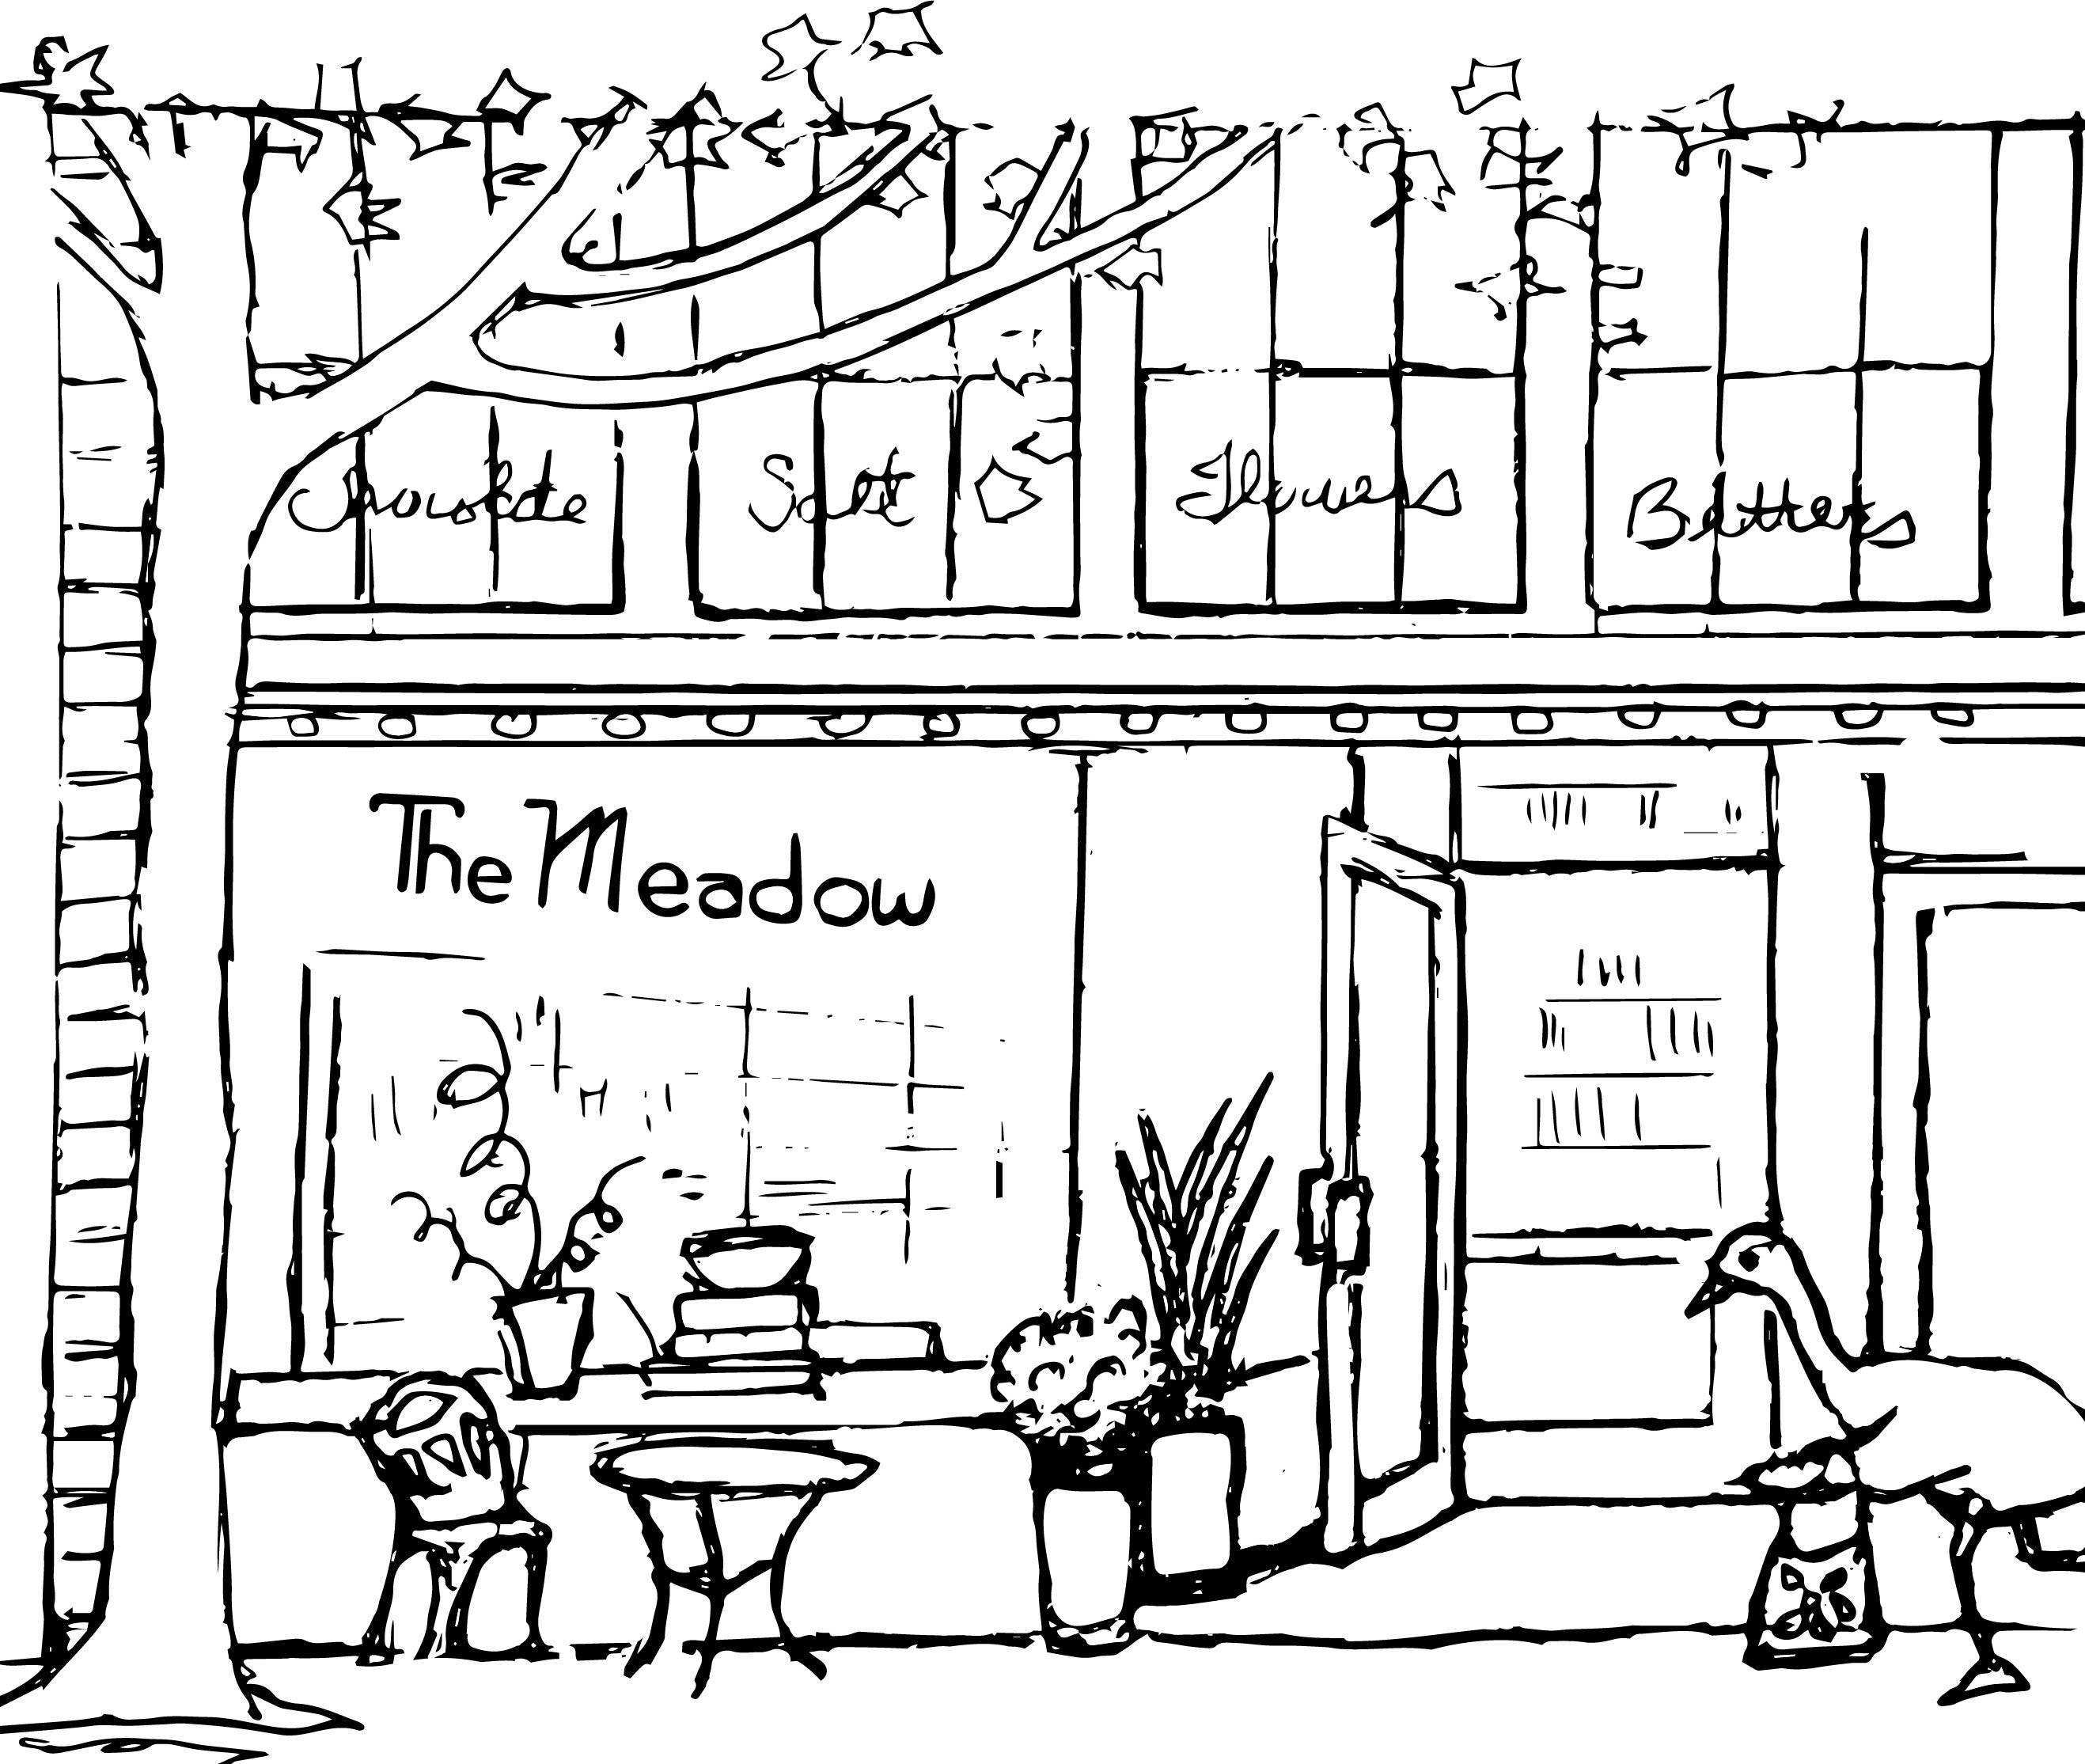 sketch of the meadow on nw 23rd avenue in portland, oregon